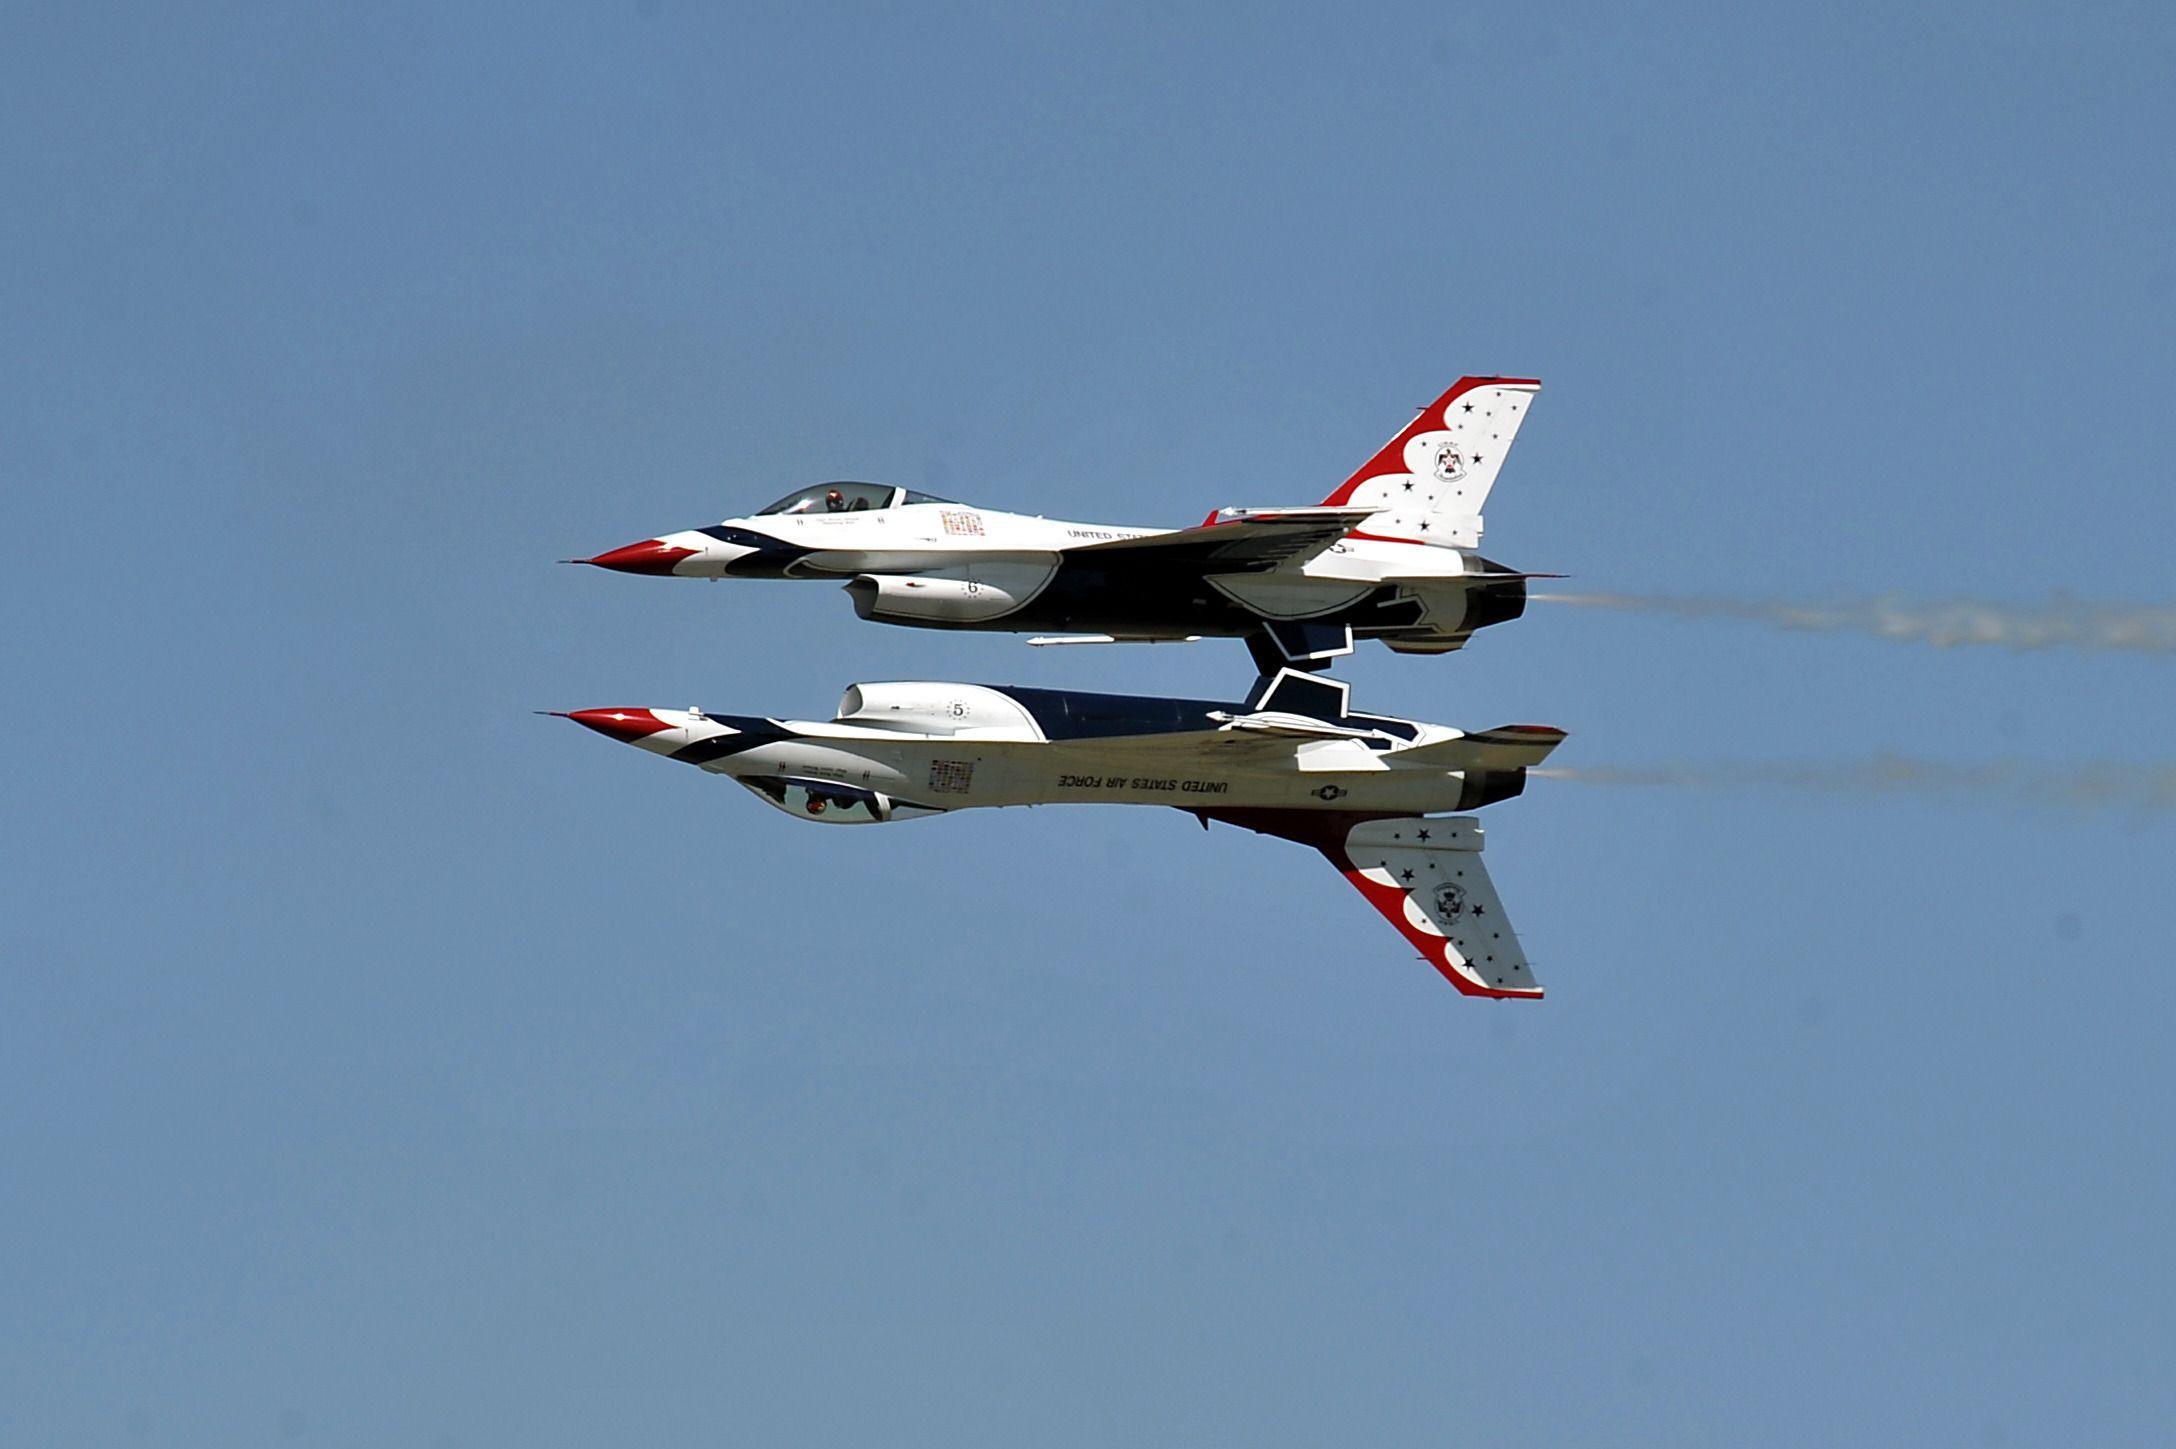 United States Air Force Thunderbirds Wallpapers